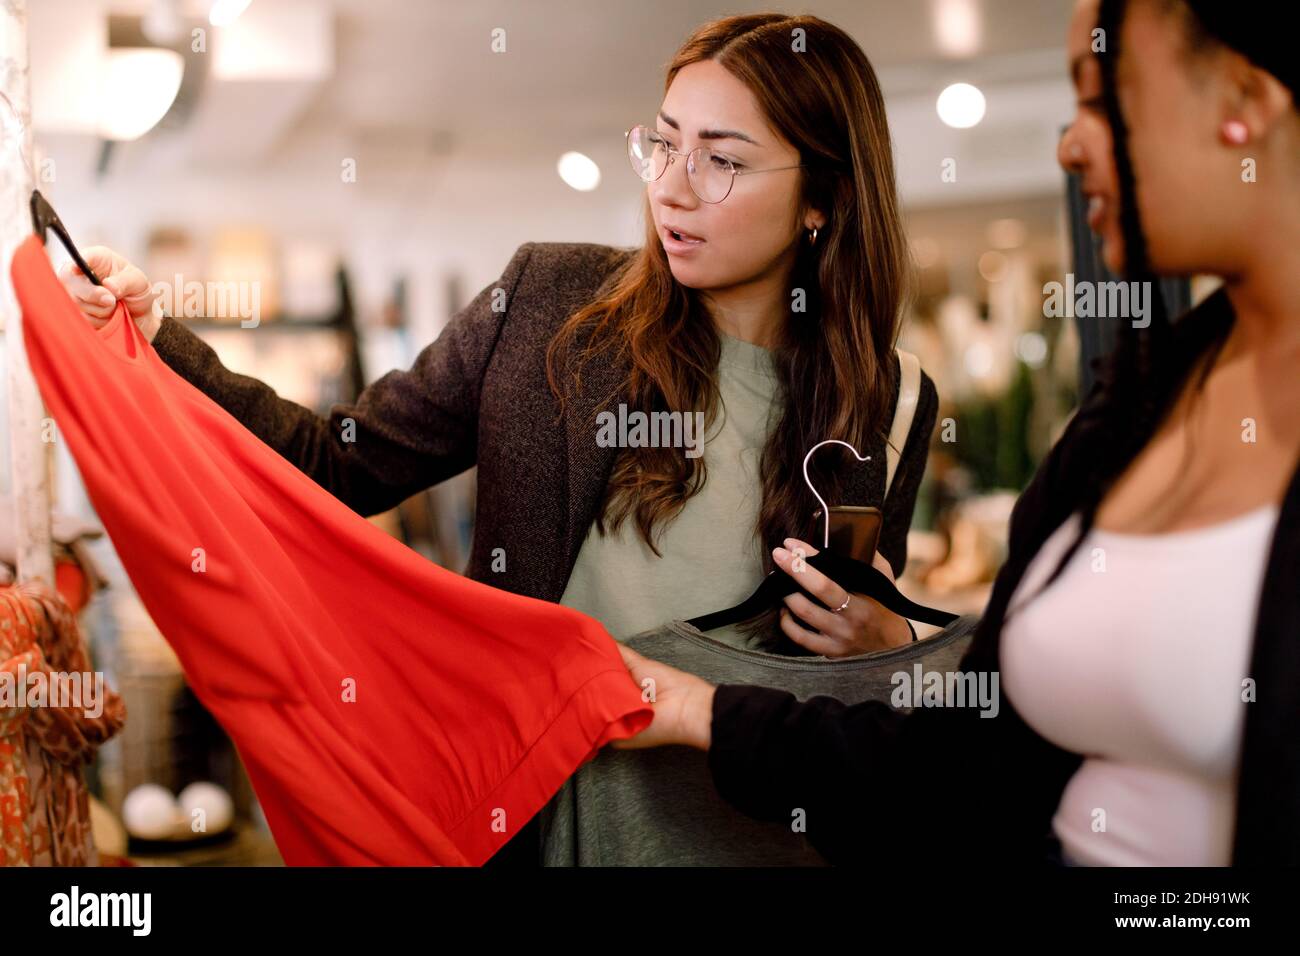 Female friends shopping at retail store Stock Photo